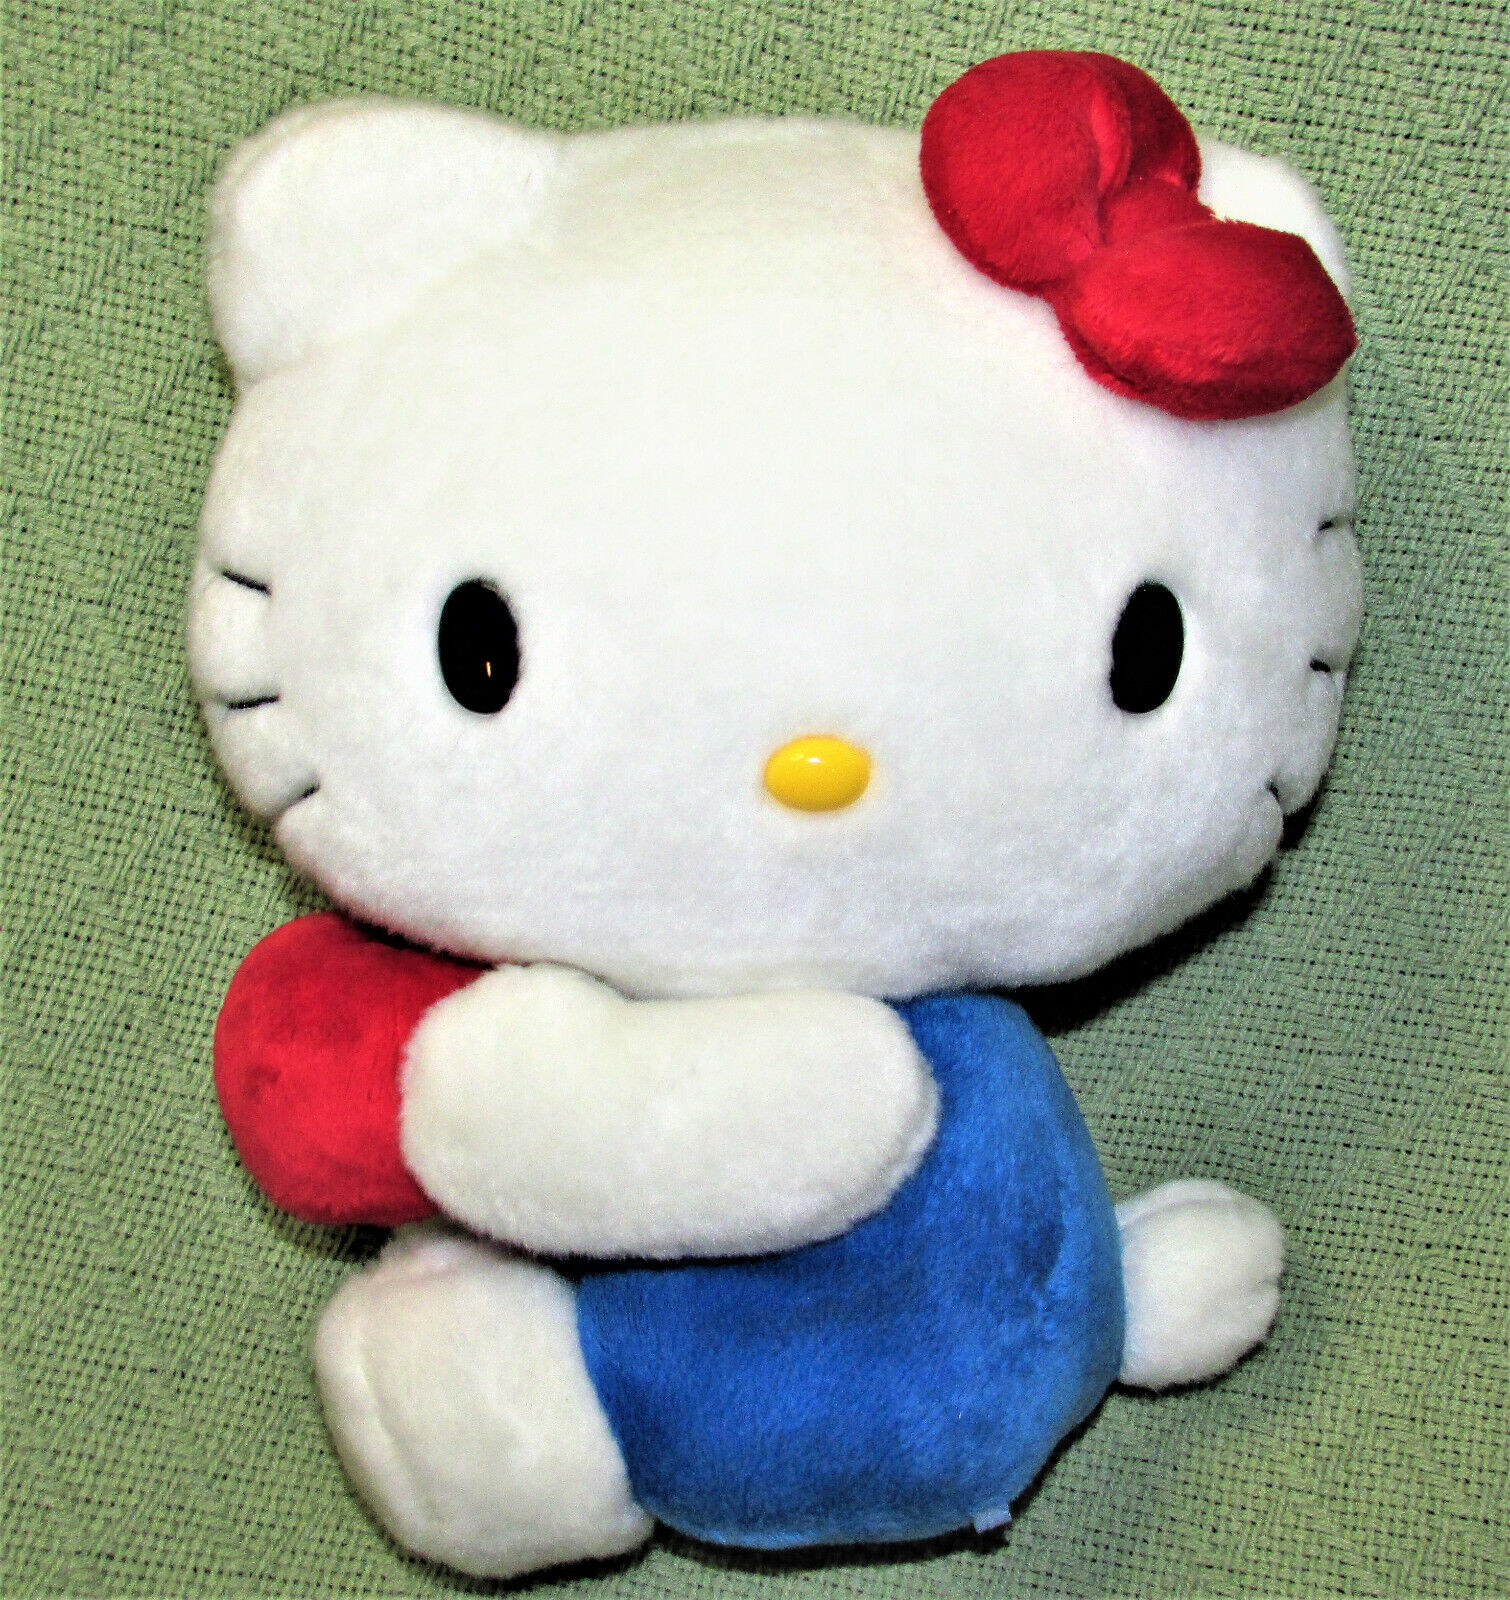 10" HELLO KITTY SANRIO STUFFED ANIMAL DOLL WHITE BLUE WITH RED BOW AND APPLE  - £7.18 GBP